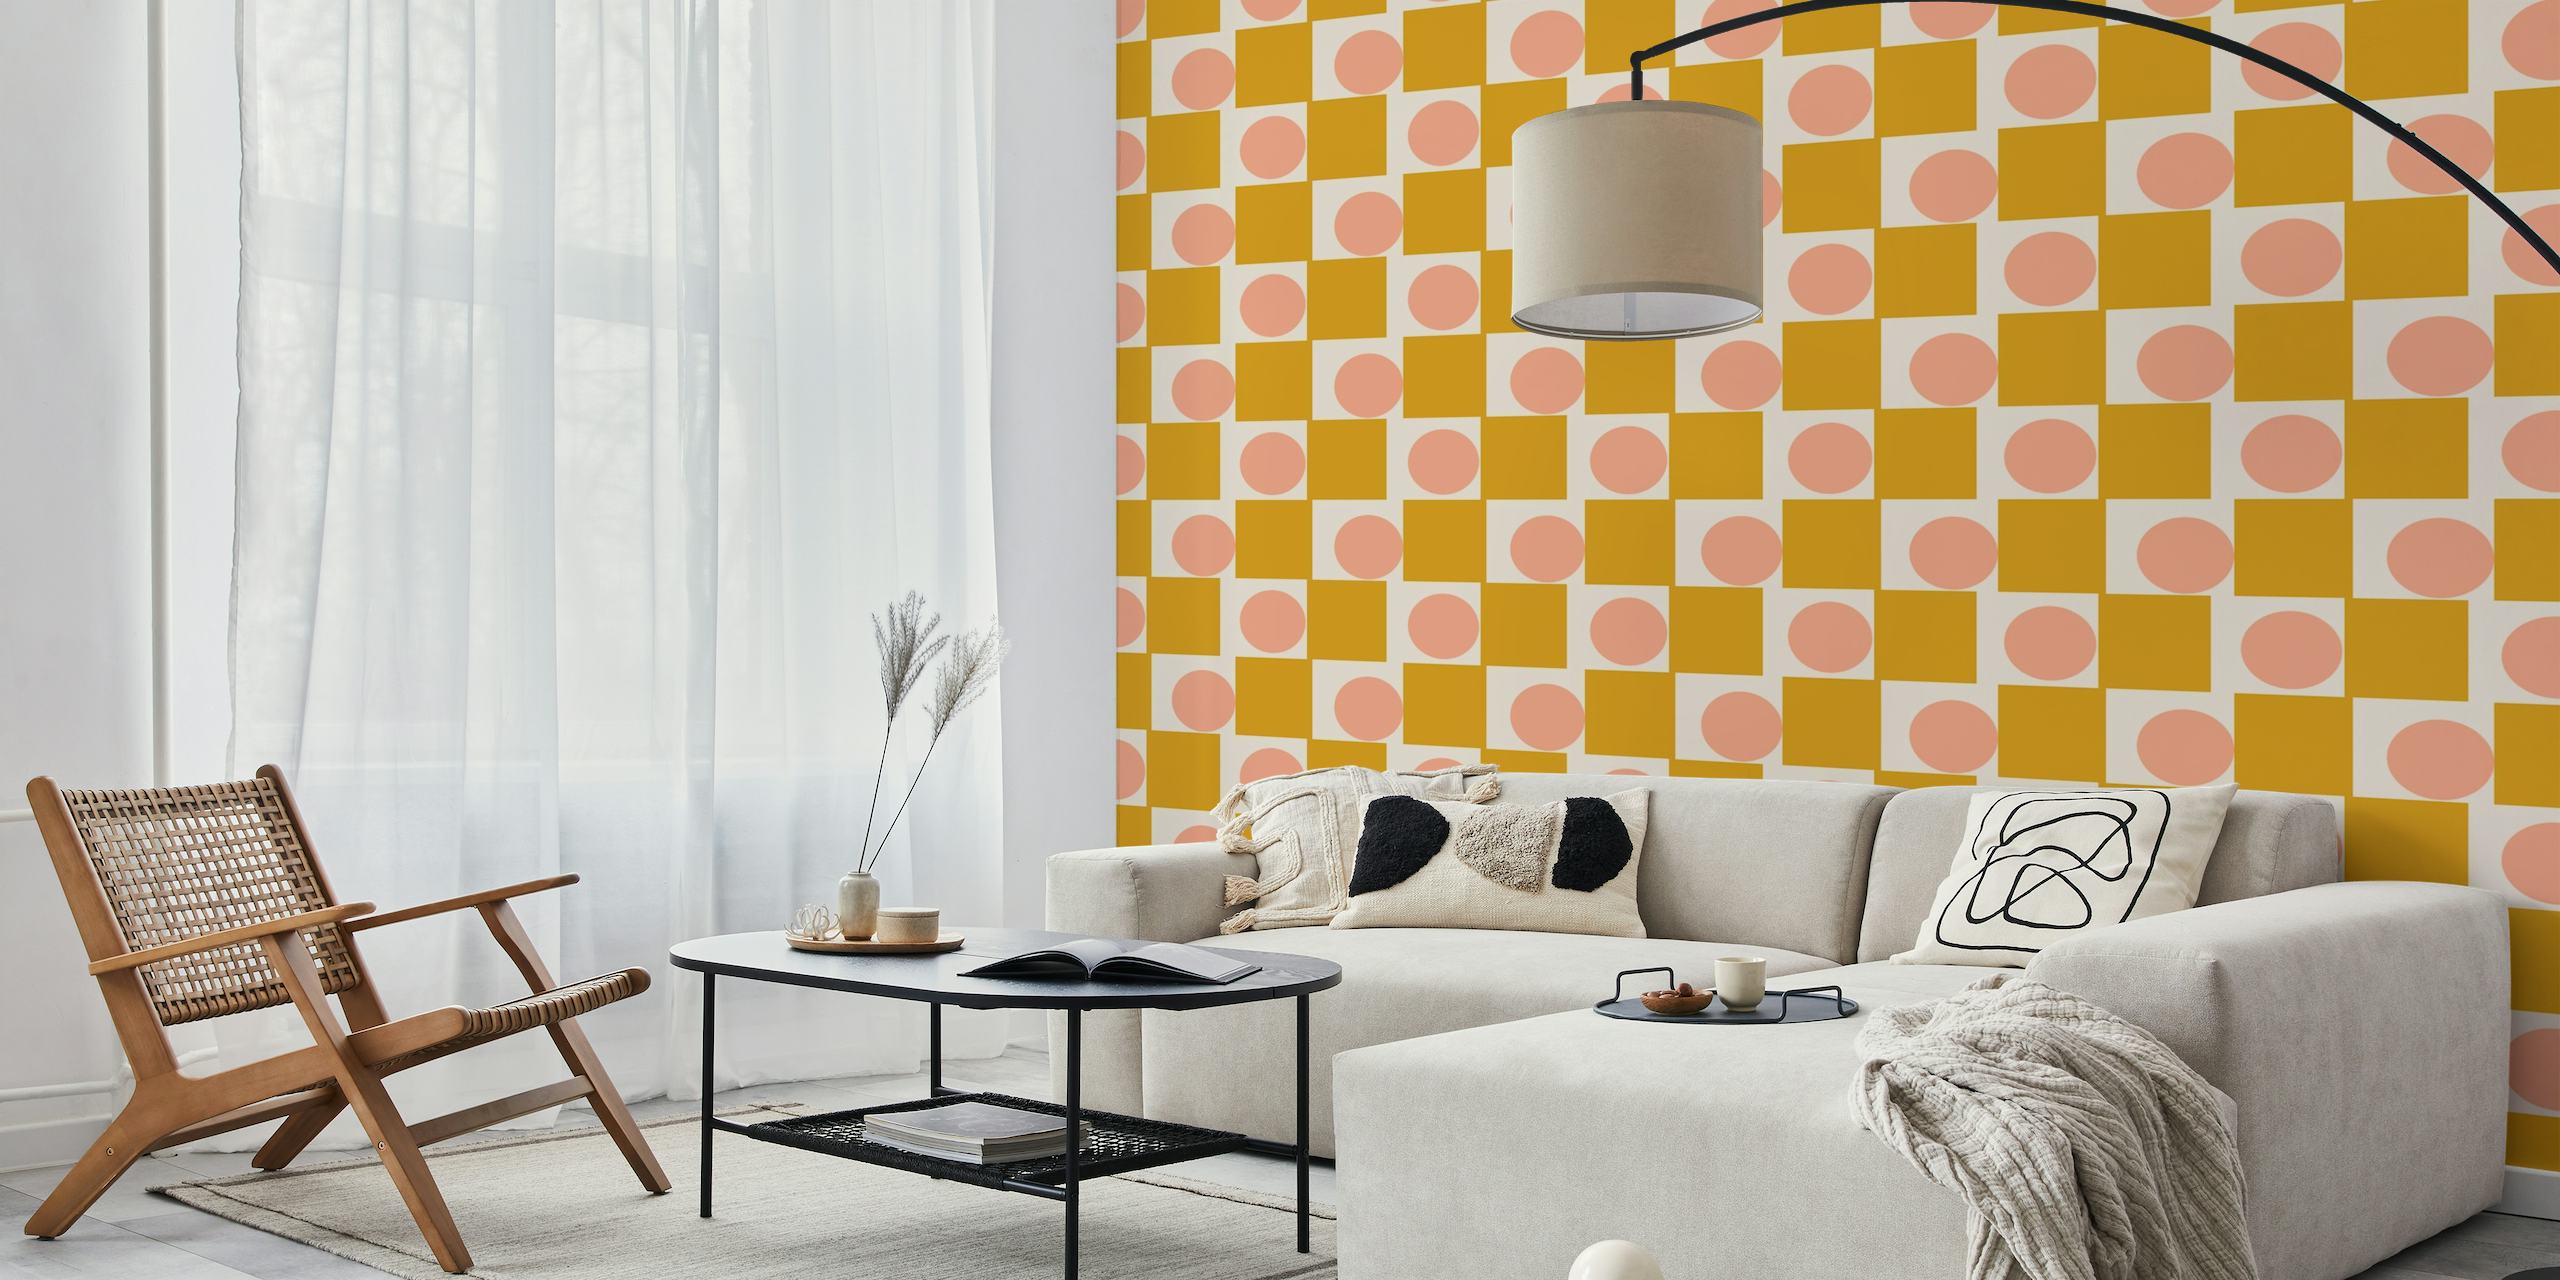 Geometric Shapes in Goldenrod and Blush Pink tapete